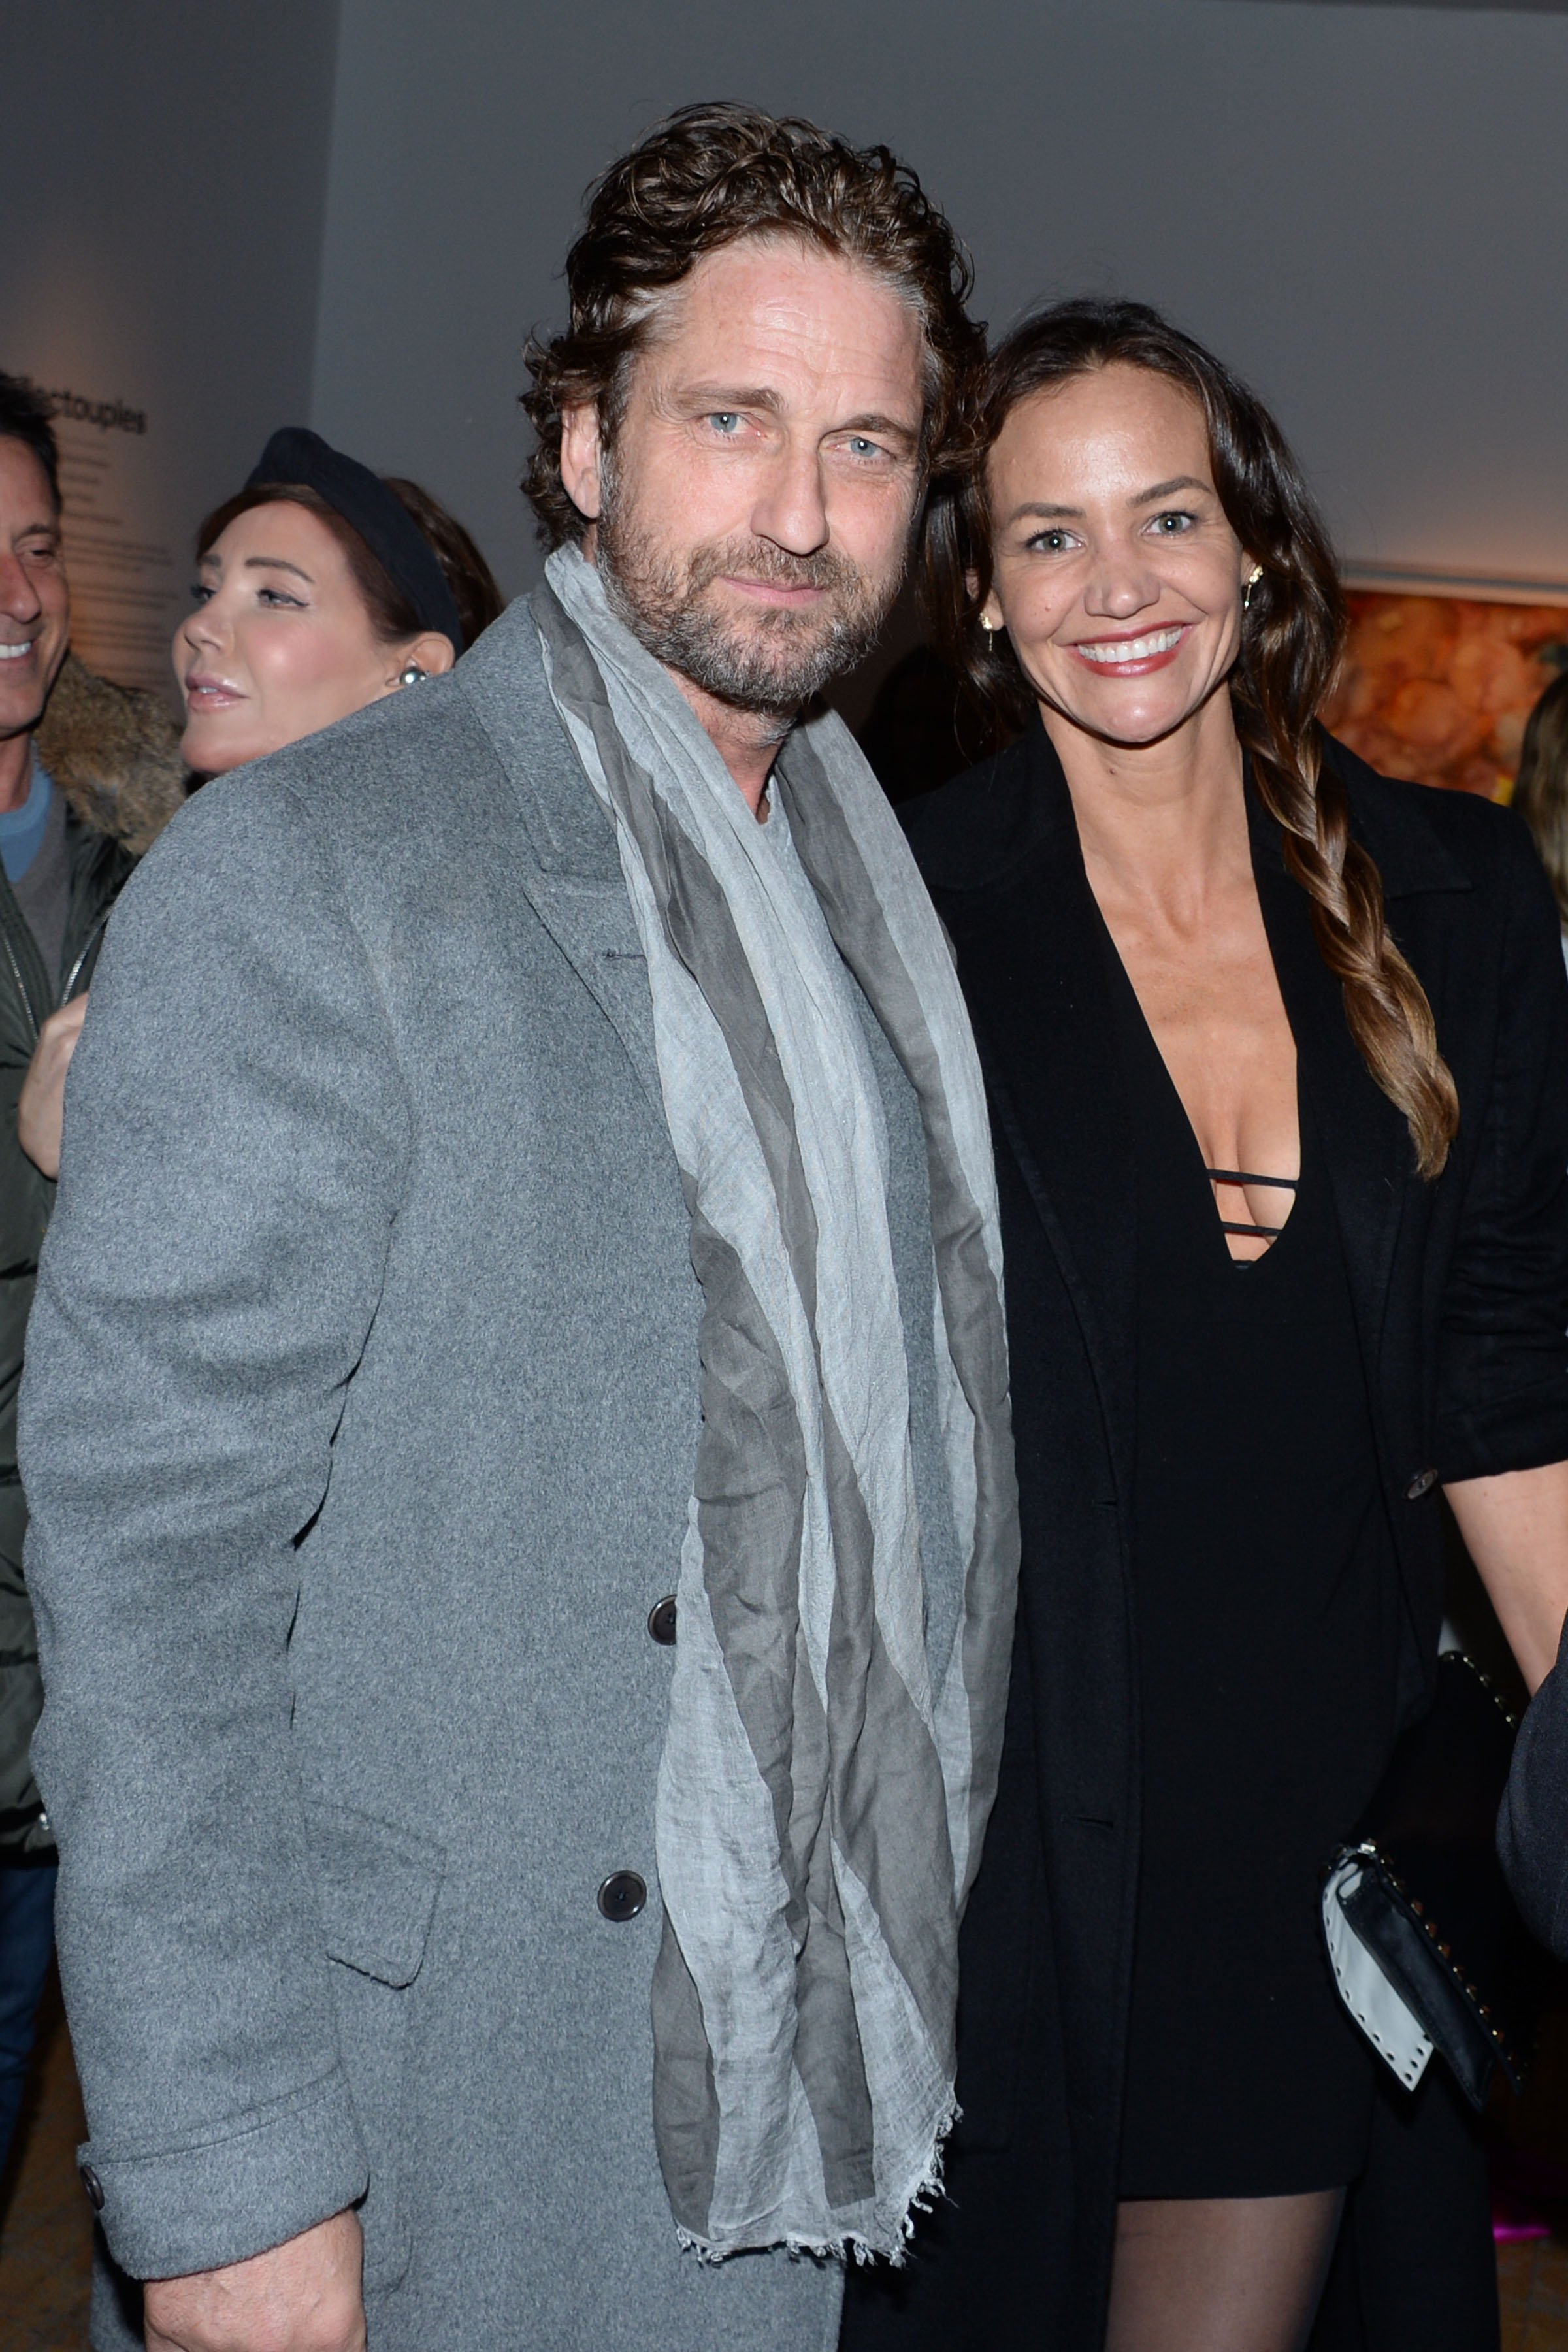 Gerard Butler and Morgan Brown at Sony Pictures Classics And The Cinema Society Host The After Party For "The Burnt Orange Heresy" at New York Academy of Art on March 5, 2020 in New York City. | Source: Getty Images